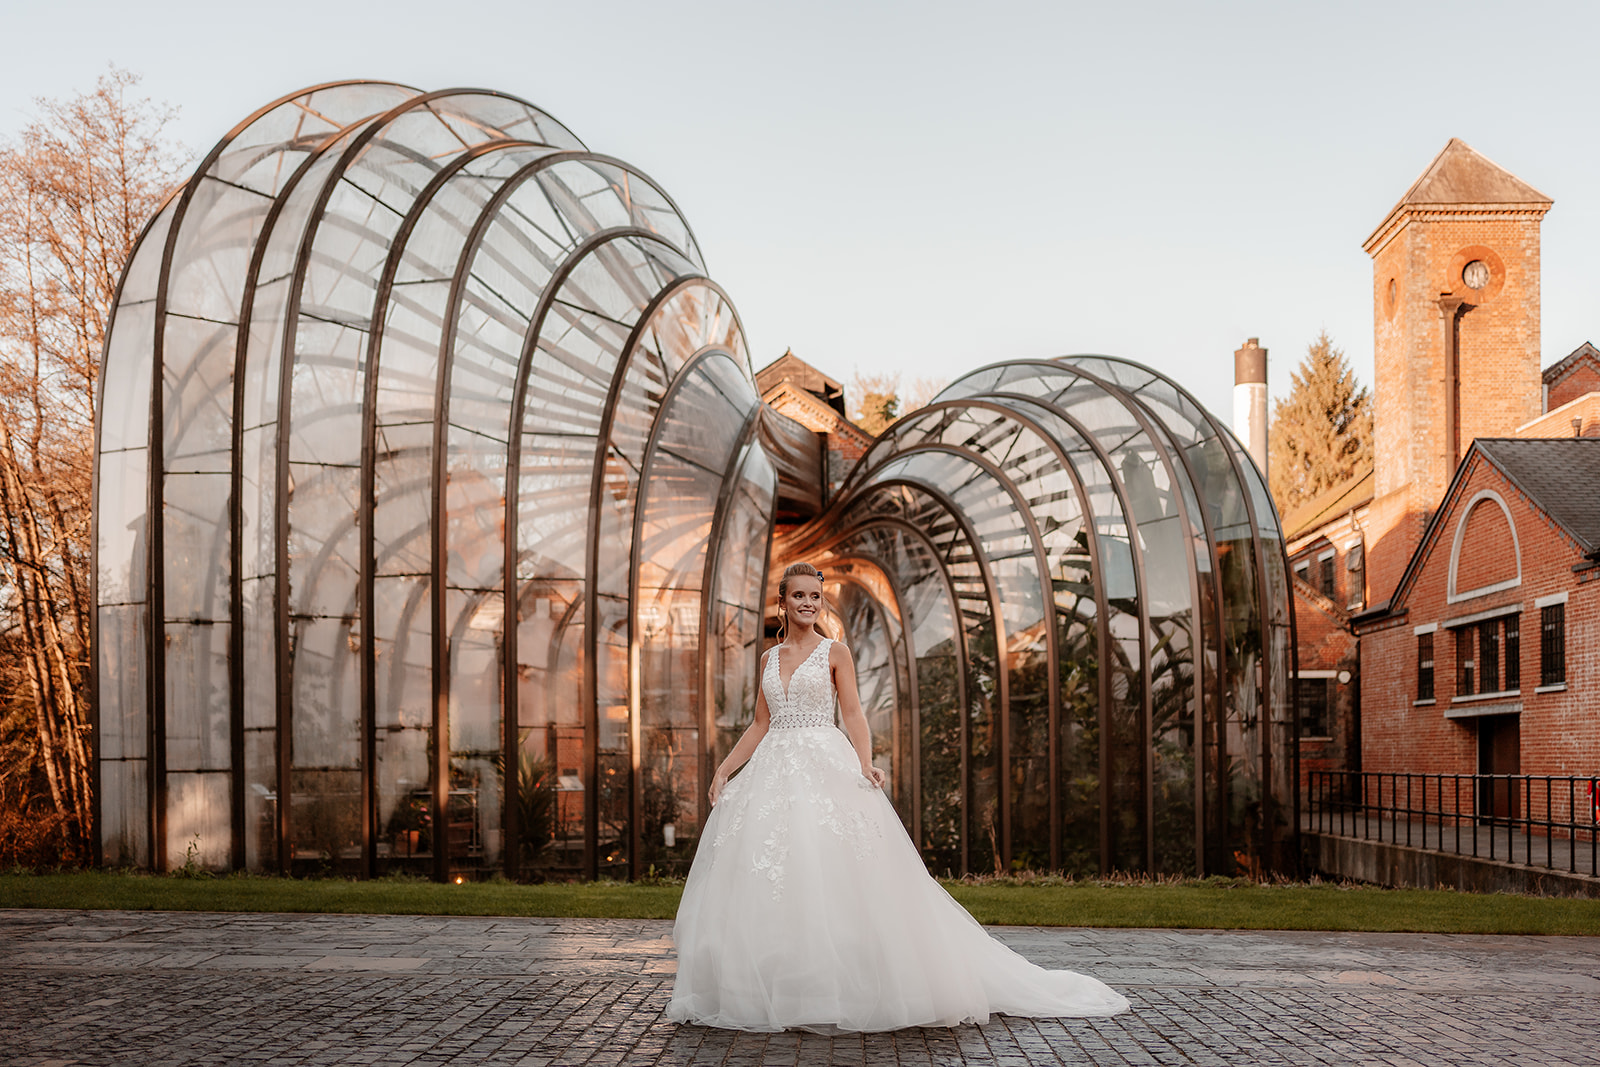 Bride in a white wedding dress stands in front of the Bombay Sapphire Distillery Glasshouses. They frame her like wings.